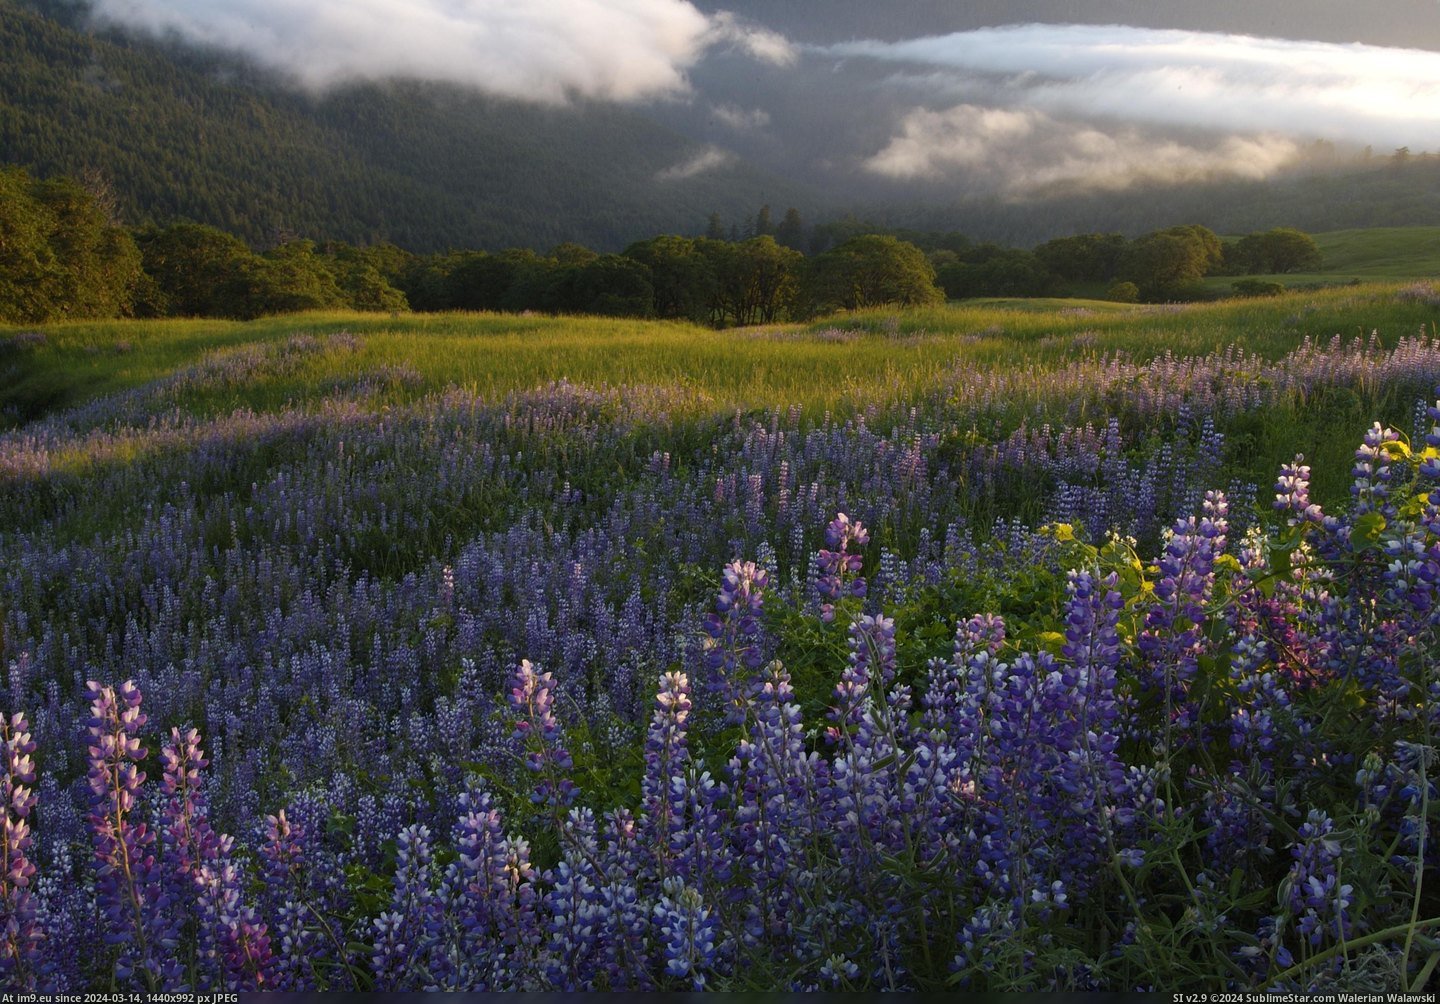 #National #California #State #Redwood #Parks #Lupine #Hills #Fog #Bald [Earthporn] Bald Hills, Lupine, and Fog: Redwood National and State Parks, California. [OC] [2843x1971] Pic. (Изображение из альбом My r/EARTHPORN favs))